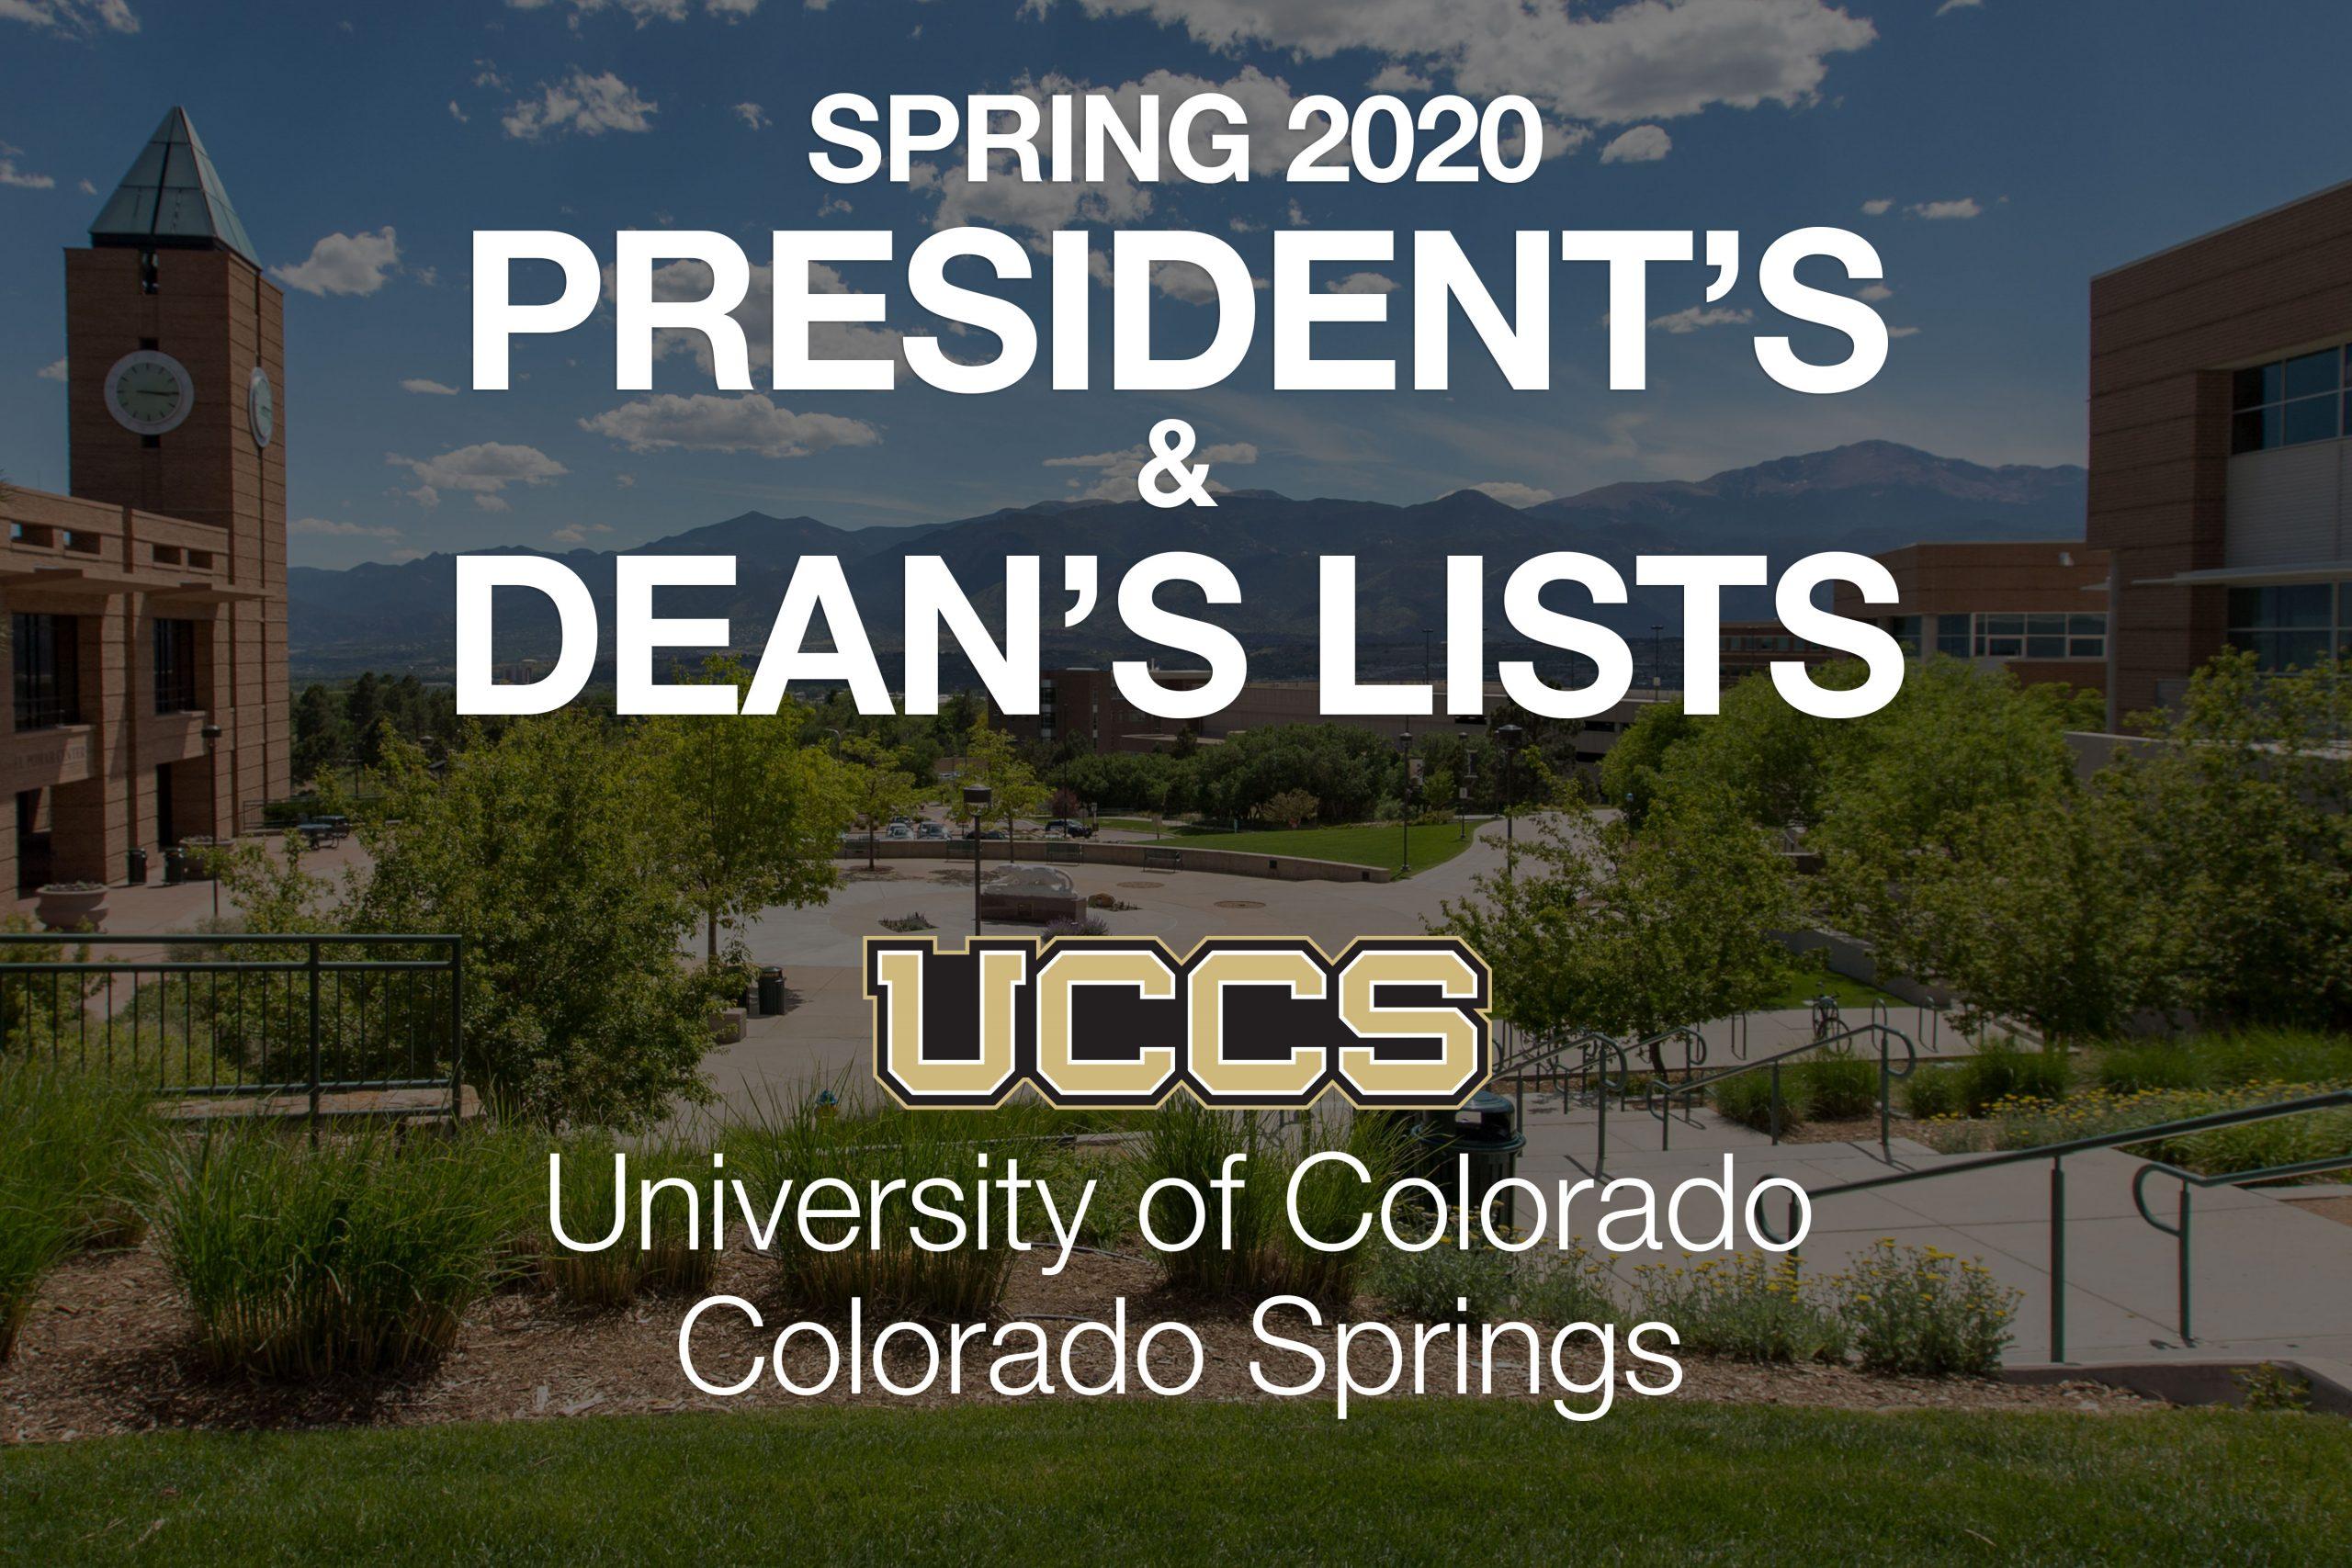 Text for the spring 2020 President's and Dean's List honors, with a darkened picture of El Pomar Plaza in the background